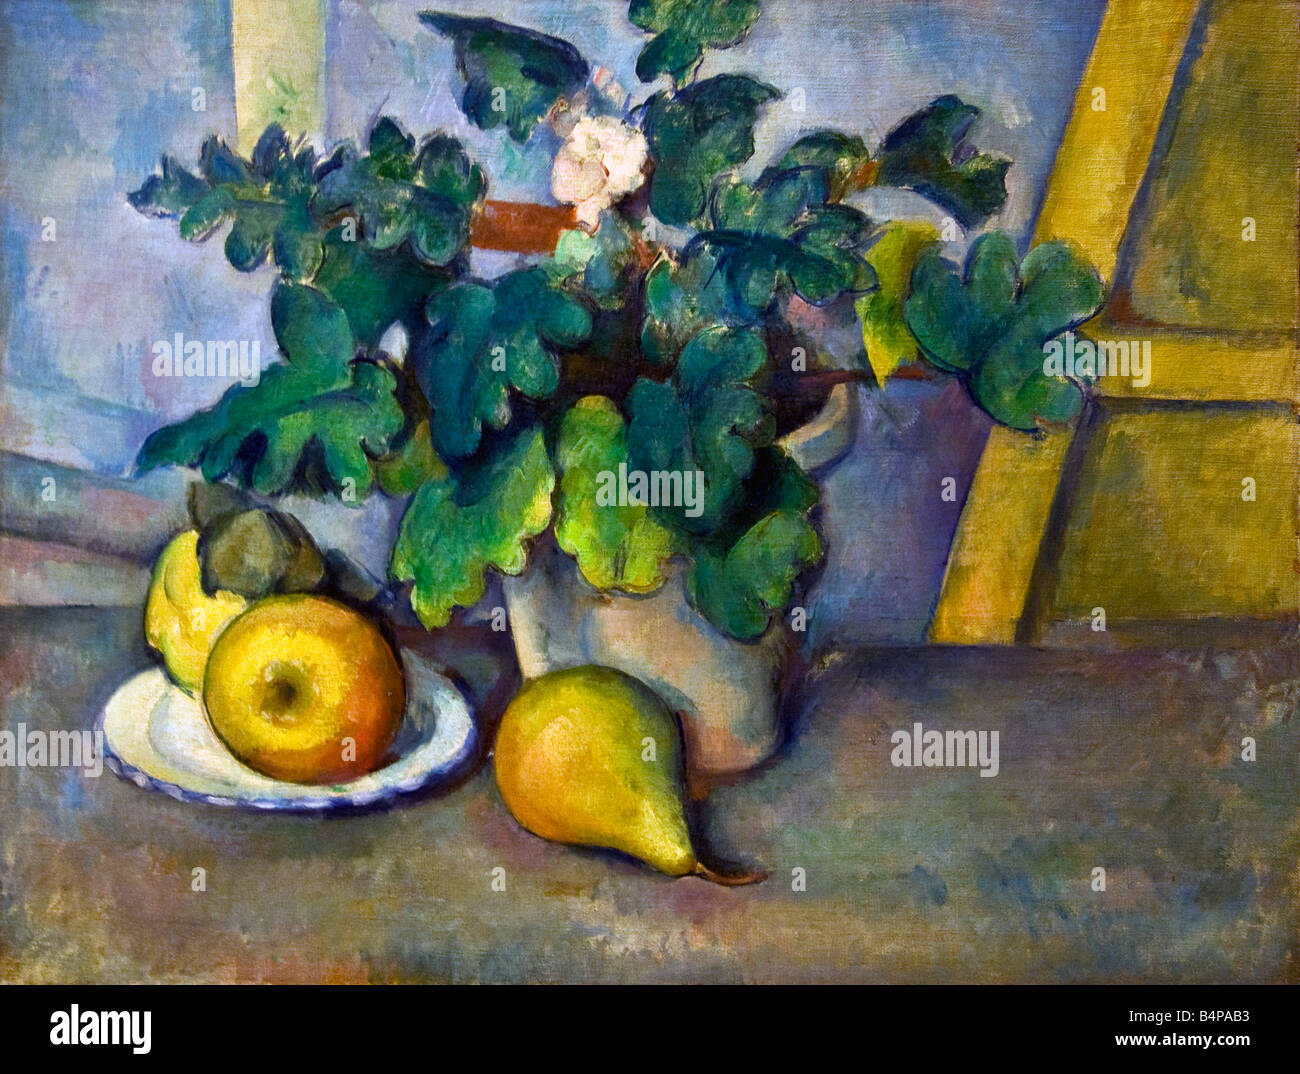 Pot of Primroses and Fruit by Paul Cezanne oil on canvas 1888-1890 Courtauld Gallery Somerset House London Stock Photo